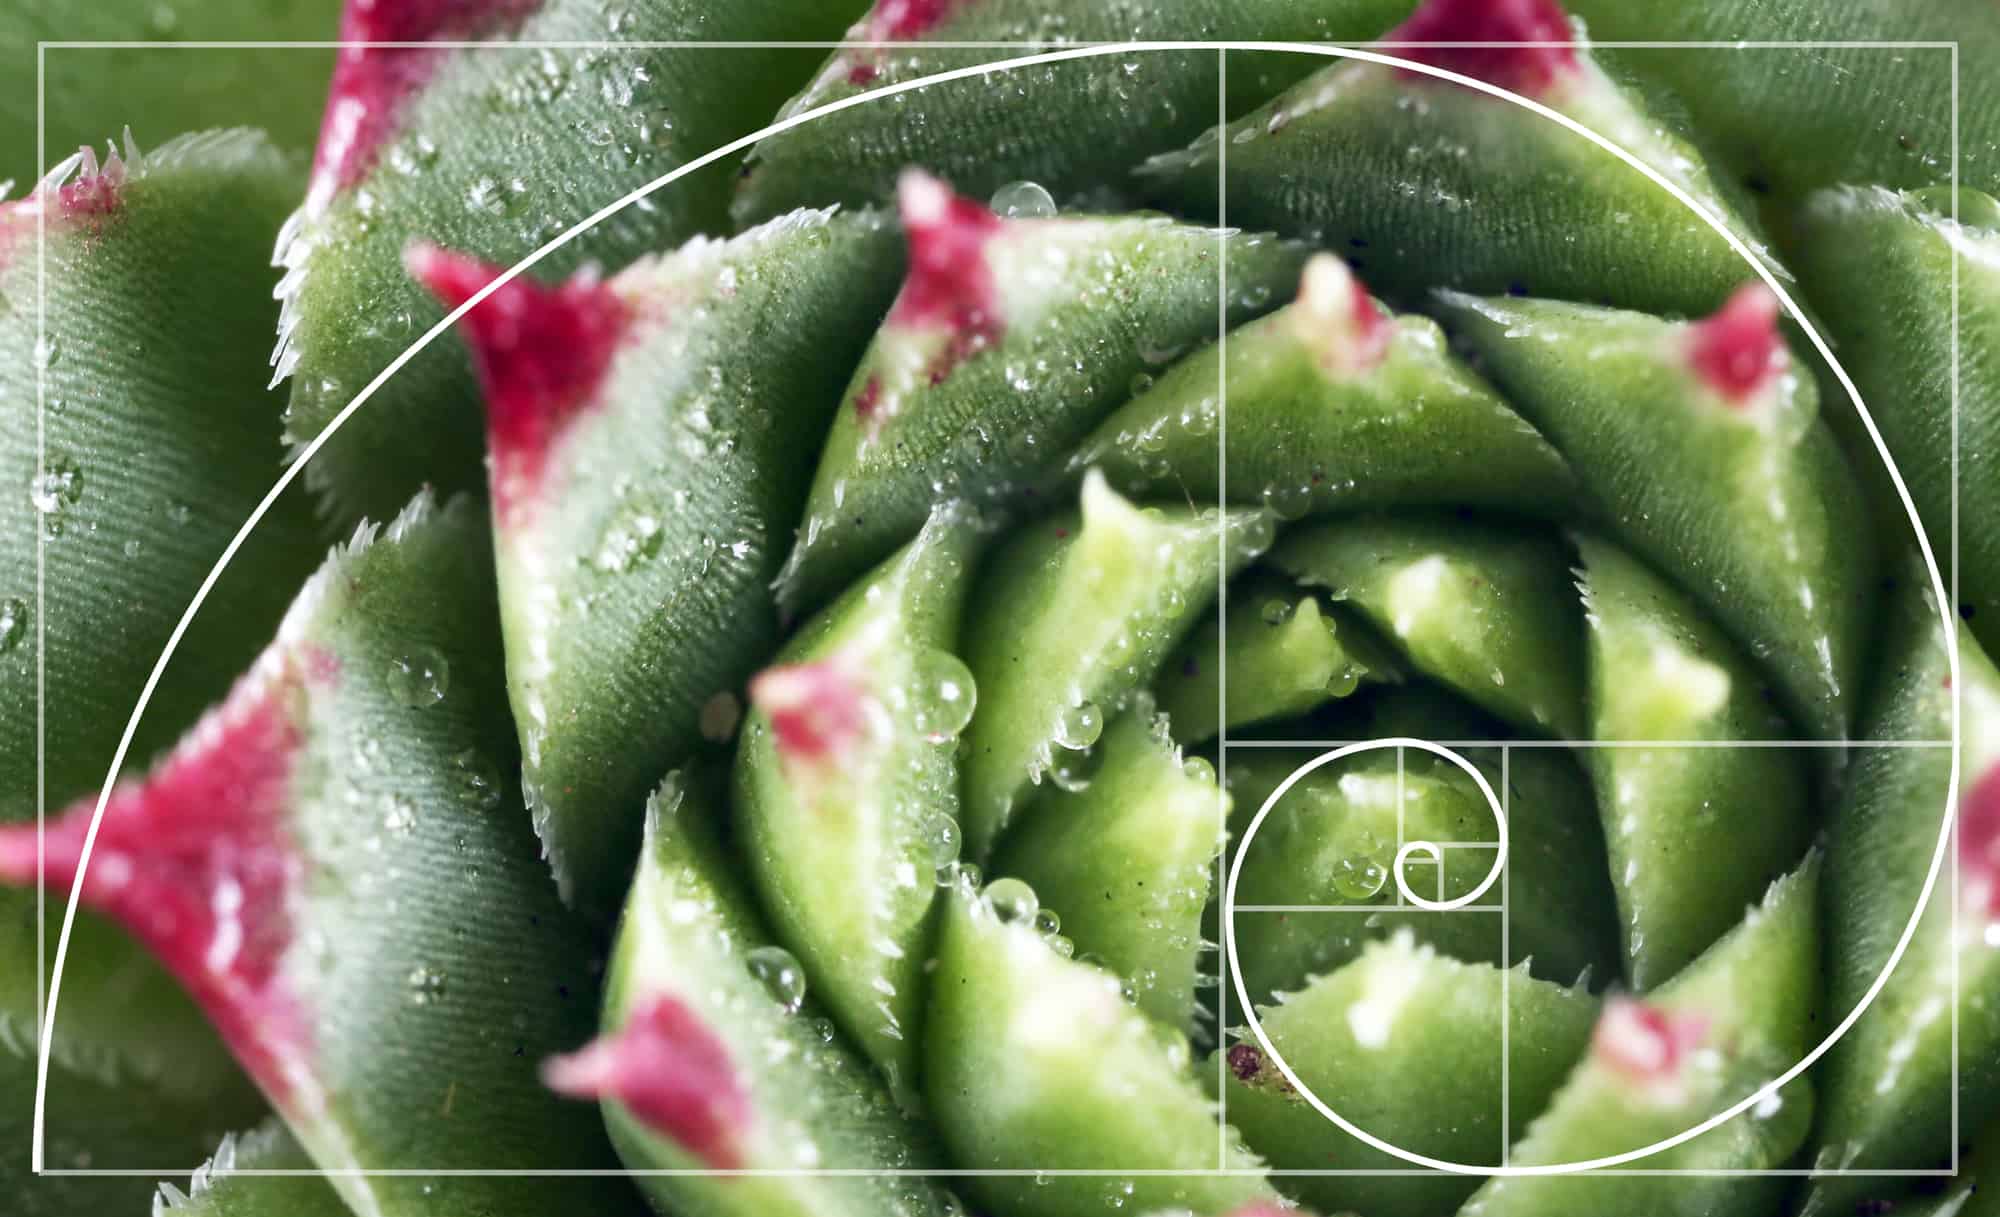 Use the Golden Spiral to draw attention